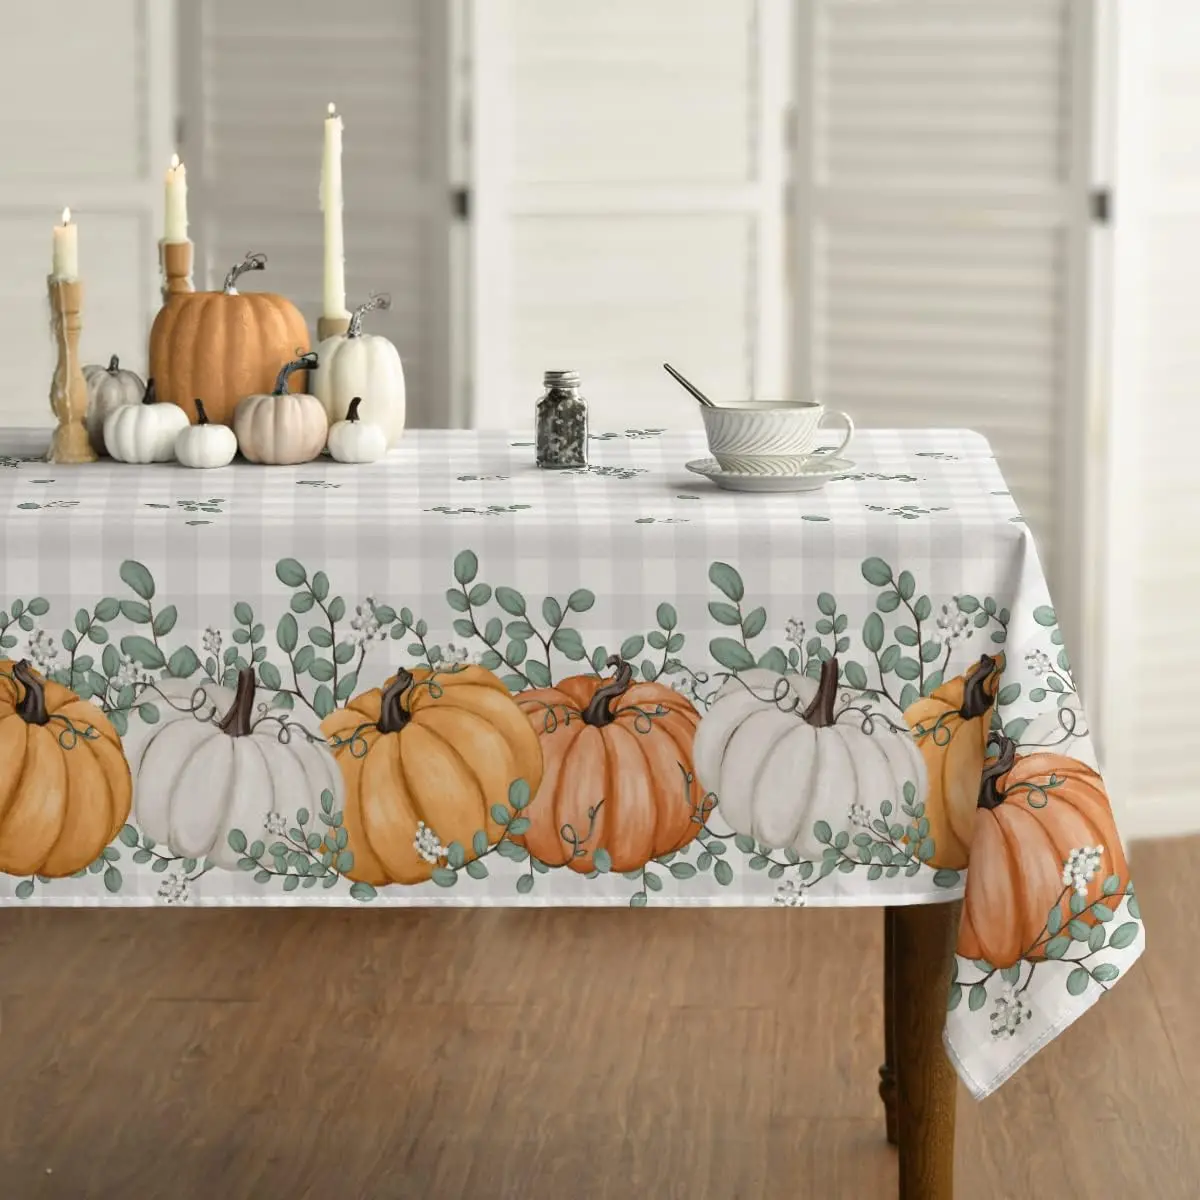 

Thanksgiving Autumn Harvest Pumpkin Rectangle Tablecloth Holiday Party Decoration Waterproof Table Covers Kitchen Table Decor